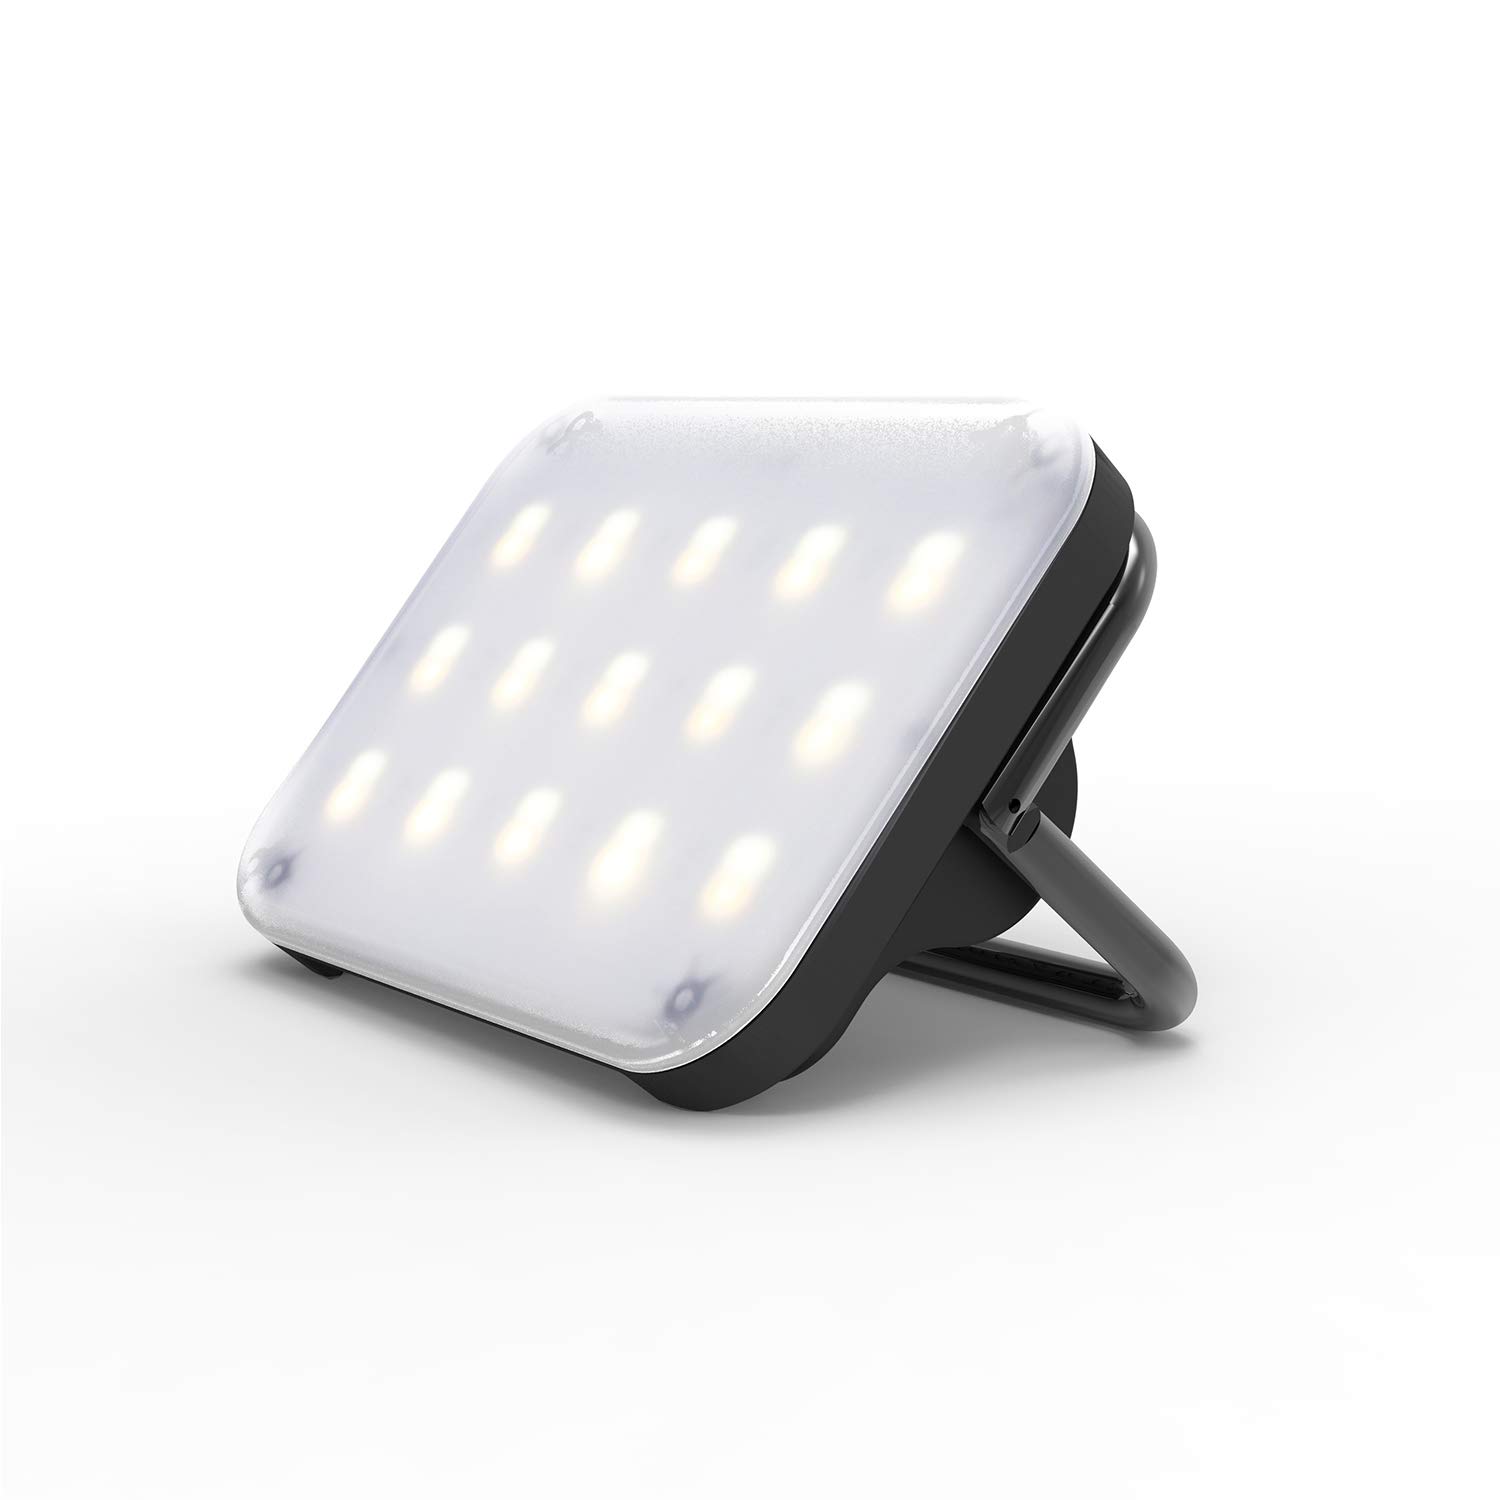 Claymore Ultra Mini Rechargeable LED Area Light 3500mAh 500 Lumens 3 Color Modes Up to 24 Hours of Use Compact Lightwe